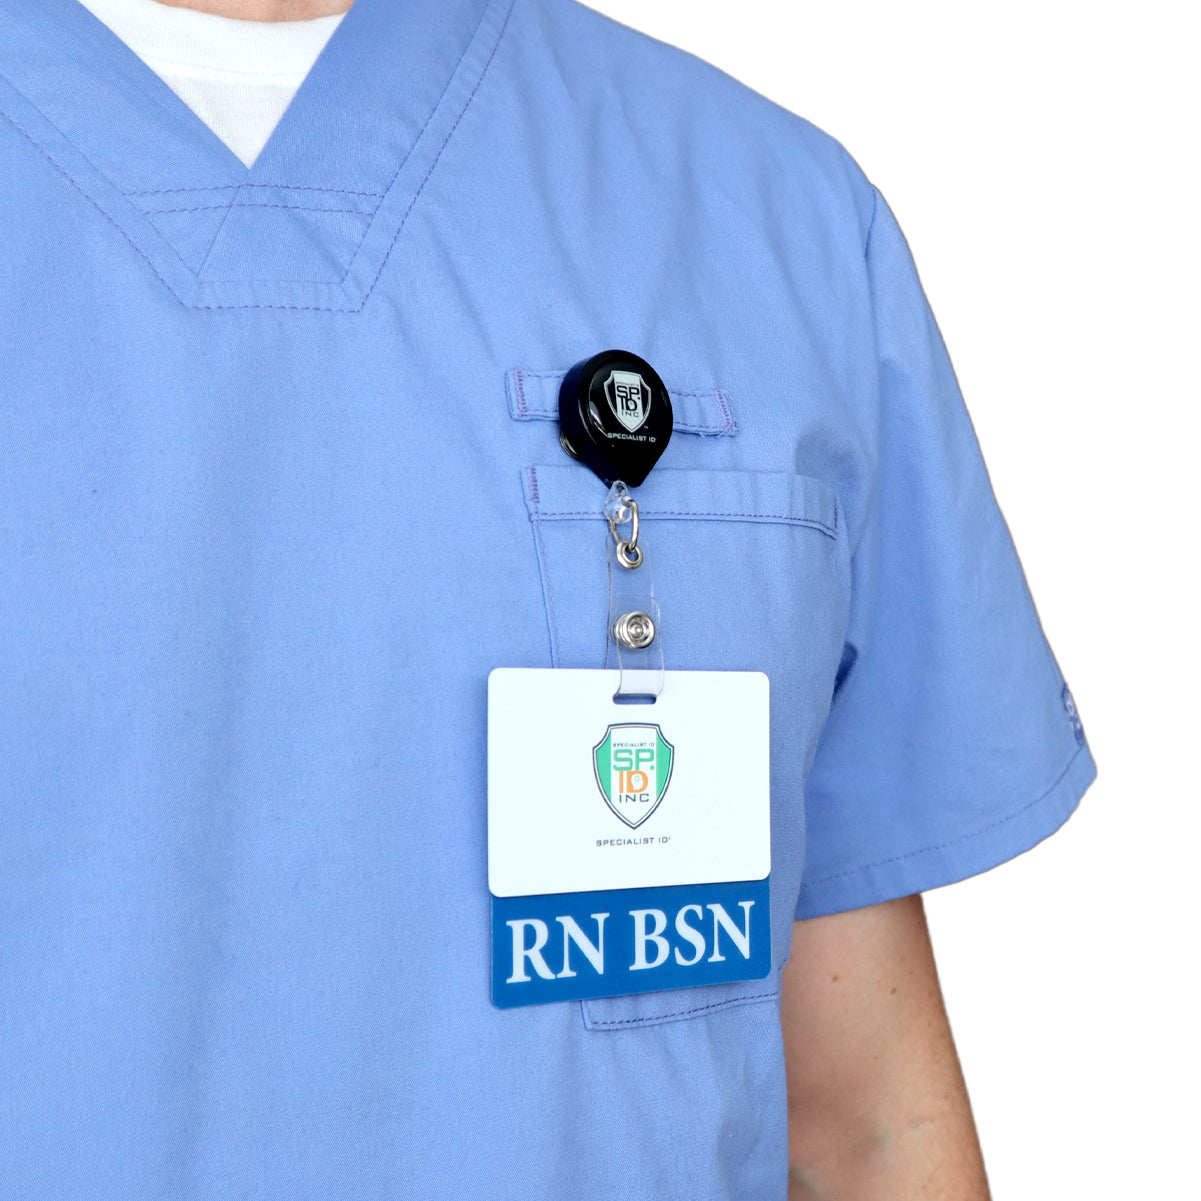 Person wearing light blue scrubs with a Clear RN BSN Badge Buddy - Horizontal Nurse ID Badge Backer - Double Sided Print and a retractable badge holder clipped to the chest pocket.